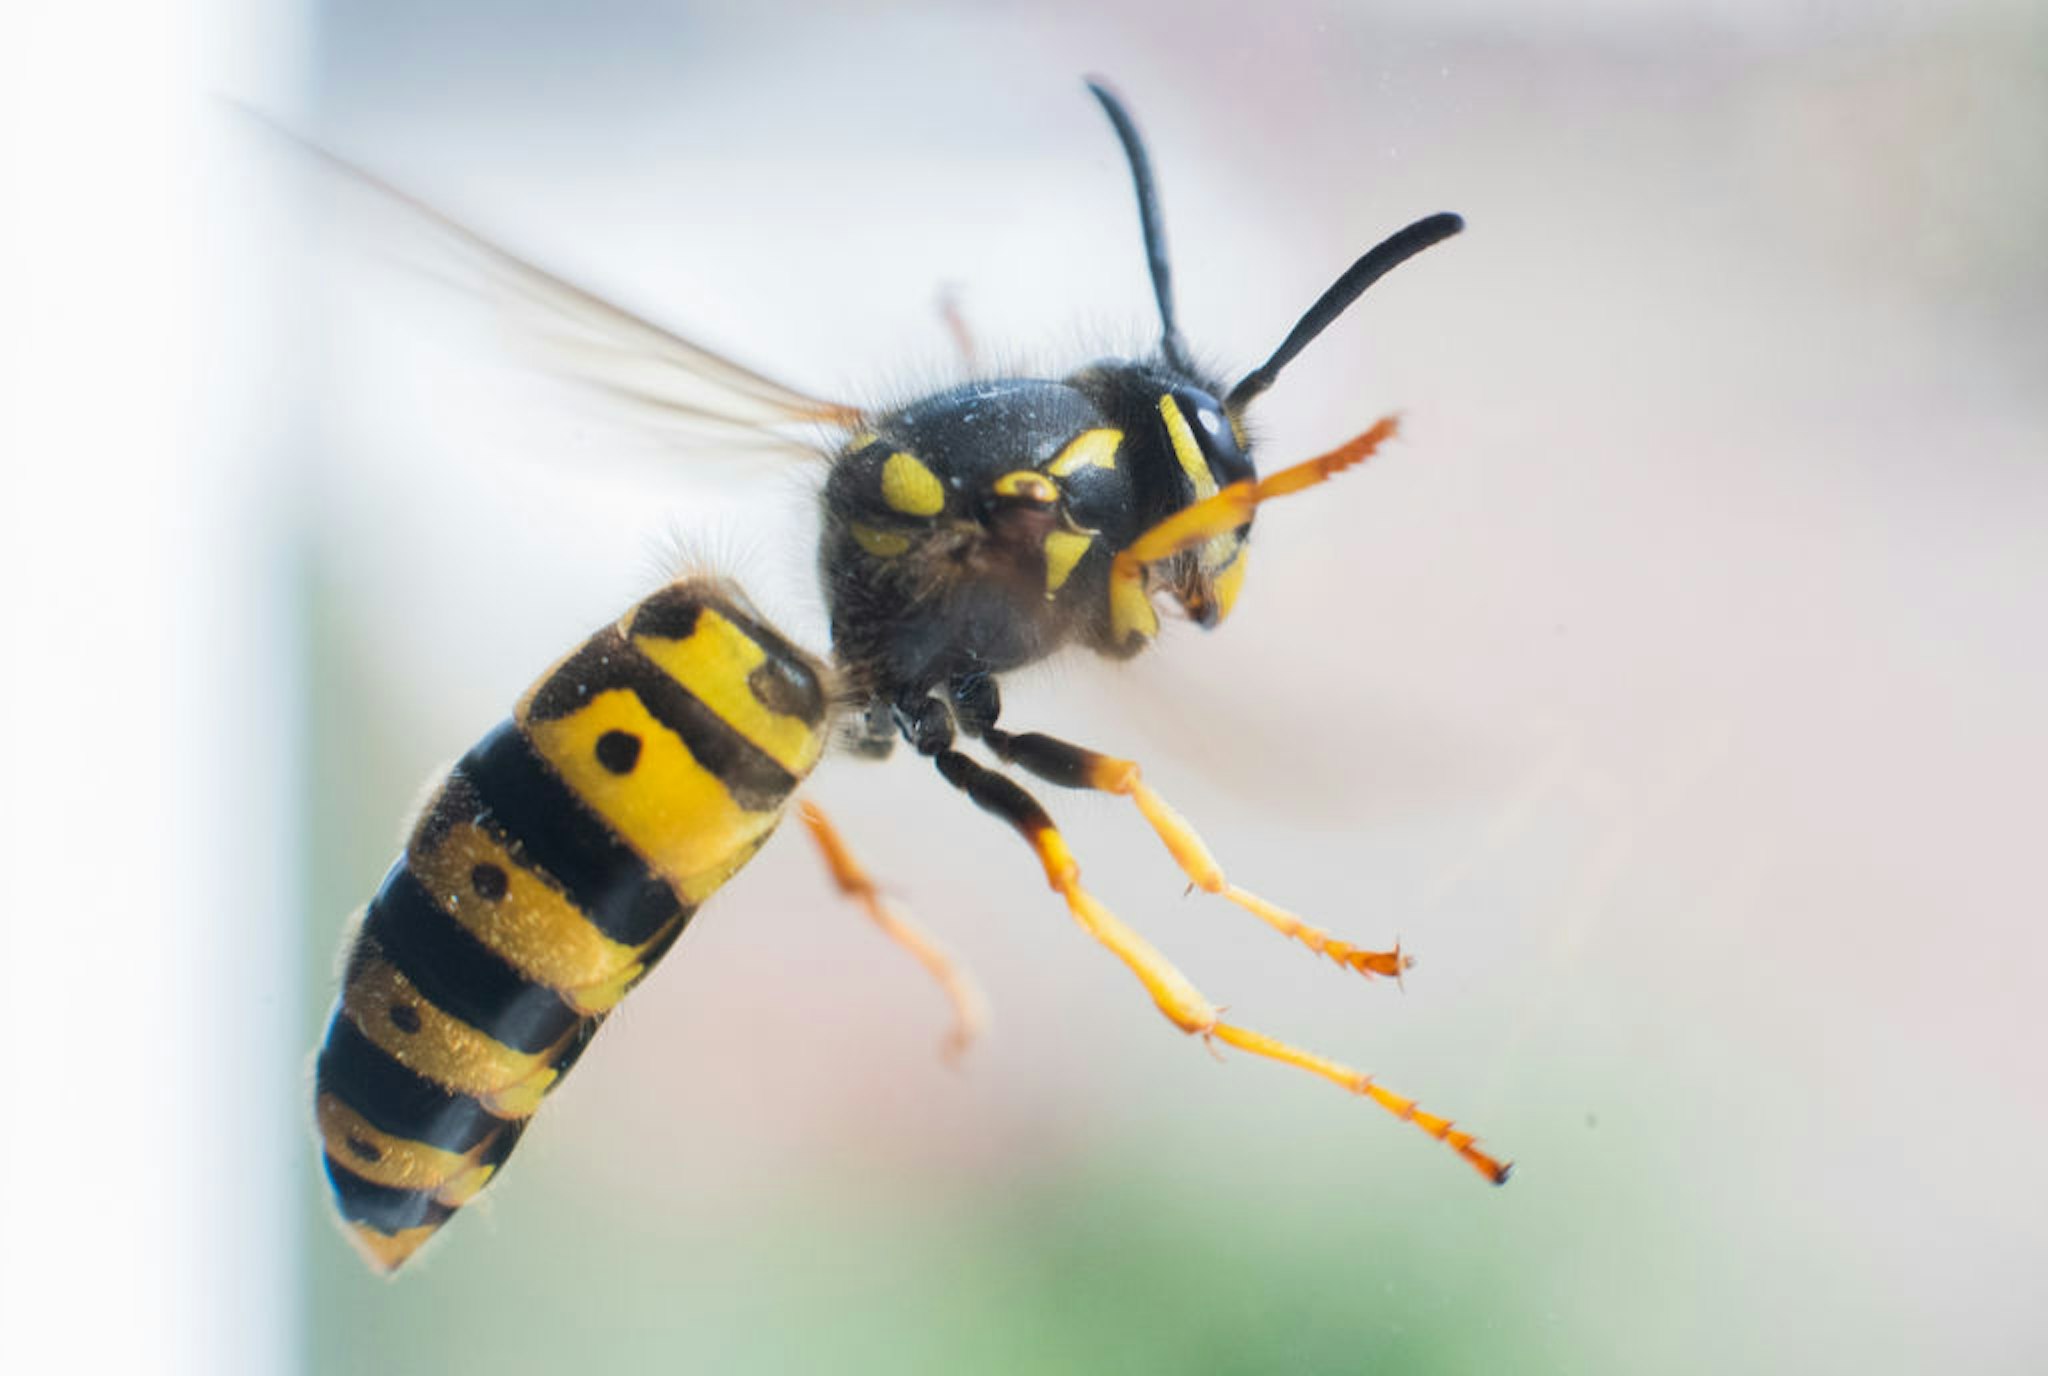 A wasp flies in front of a windowpane.